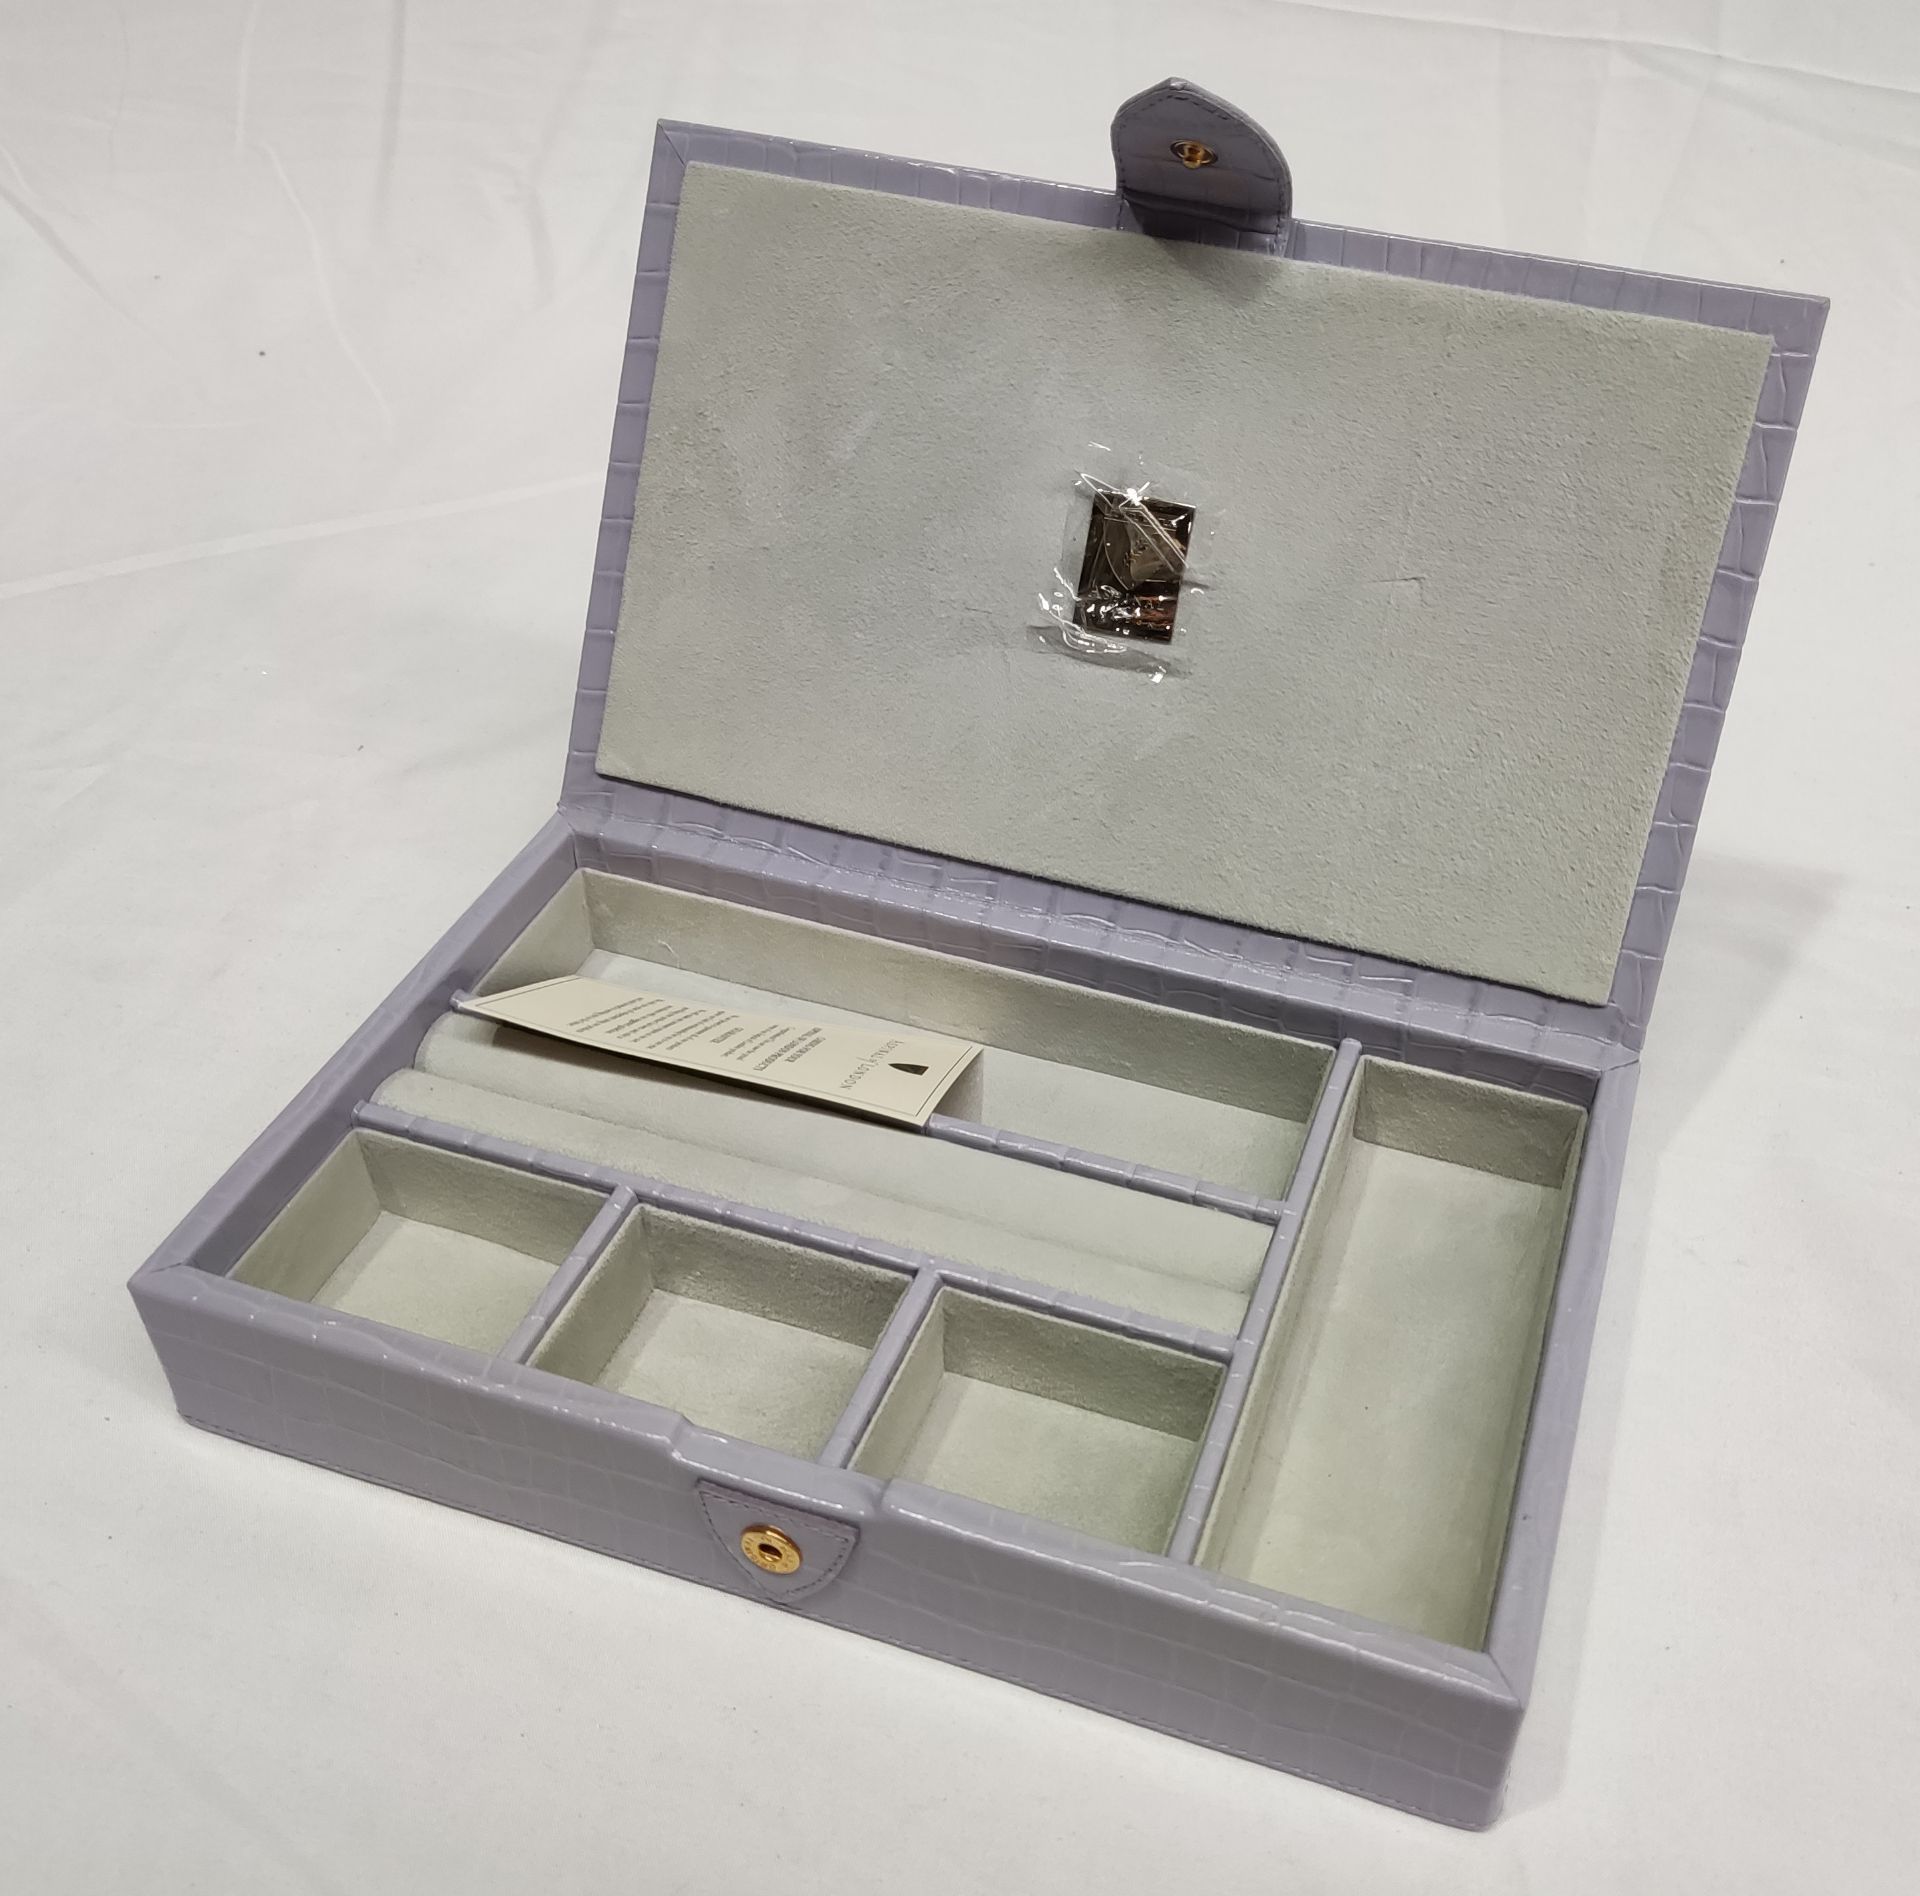 1 x ASPINAL OF LONDON Paris Leather Jewellery Case In Deep Shine English Lavender Small Croc - New/ - Image 12 of 18